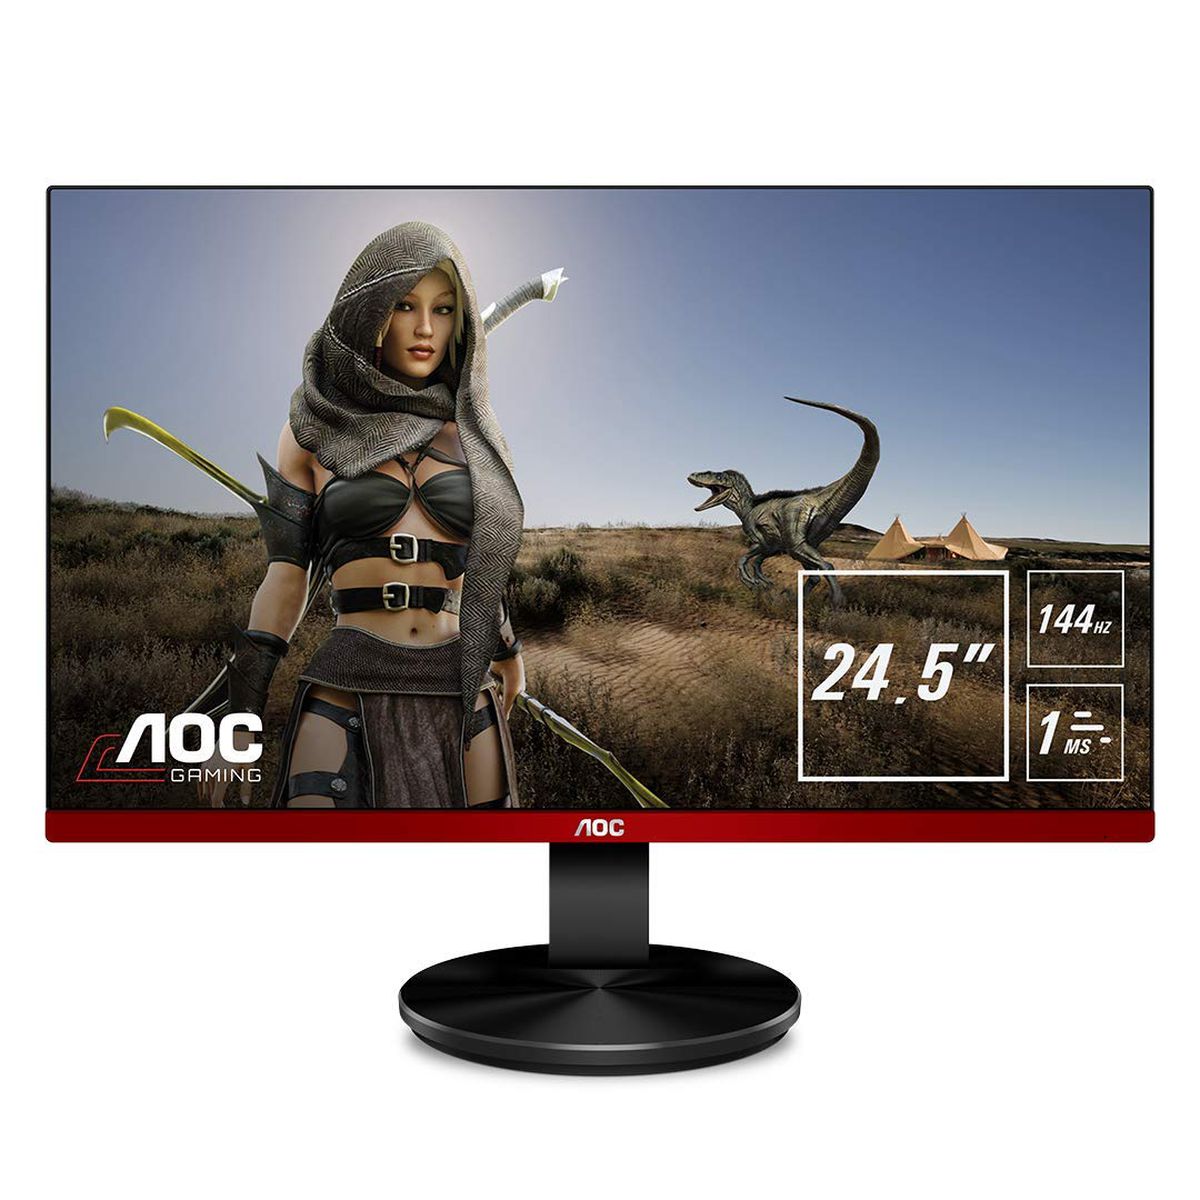 A product shot of the AOC G2590FX gaming monitor